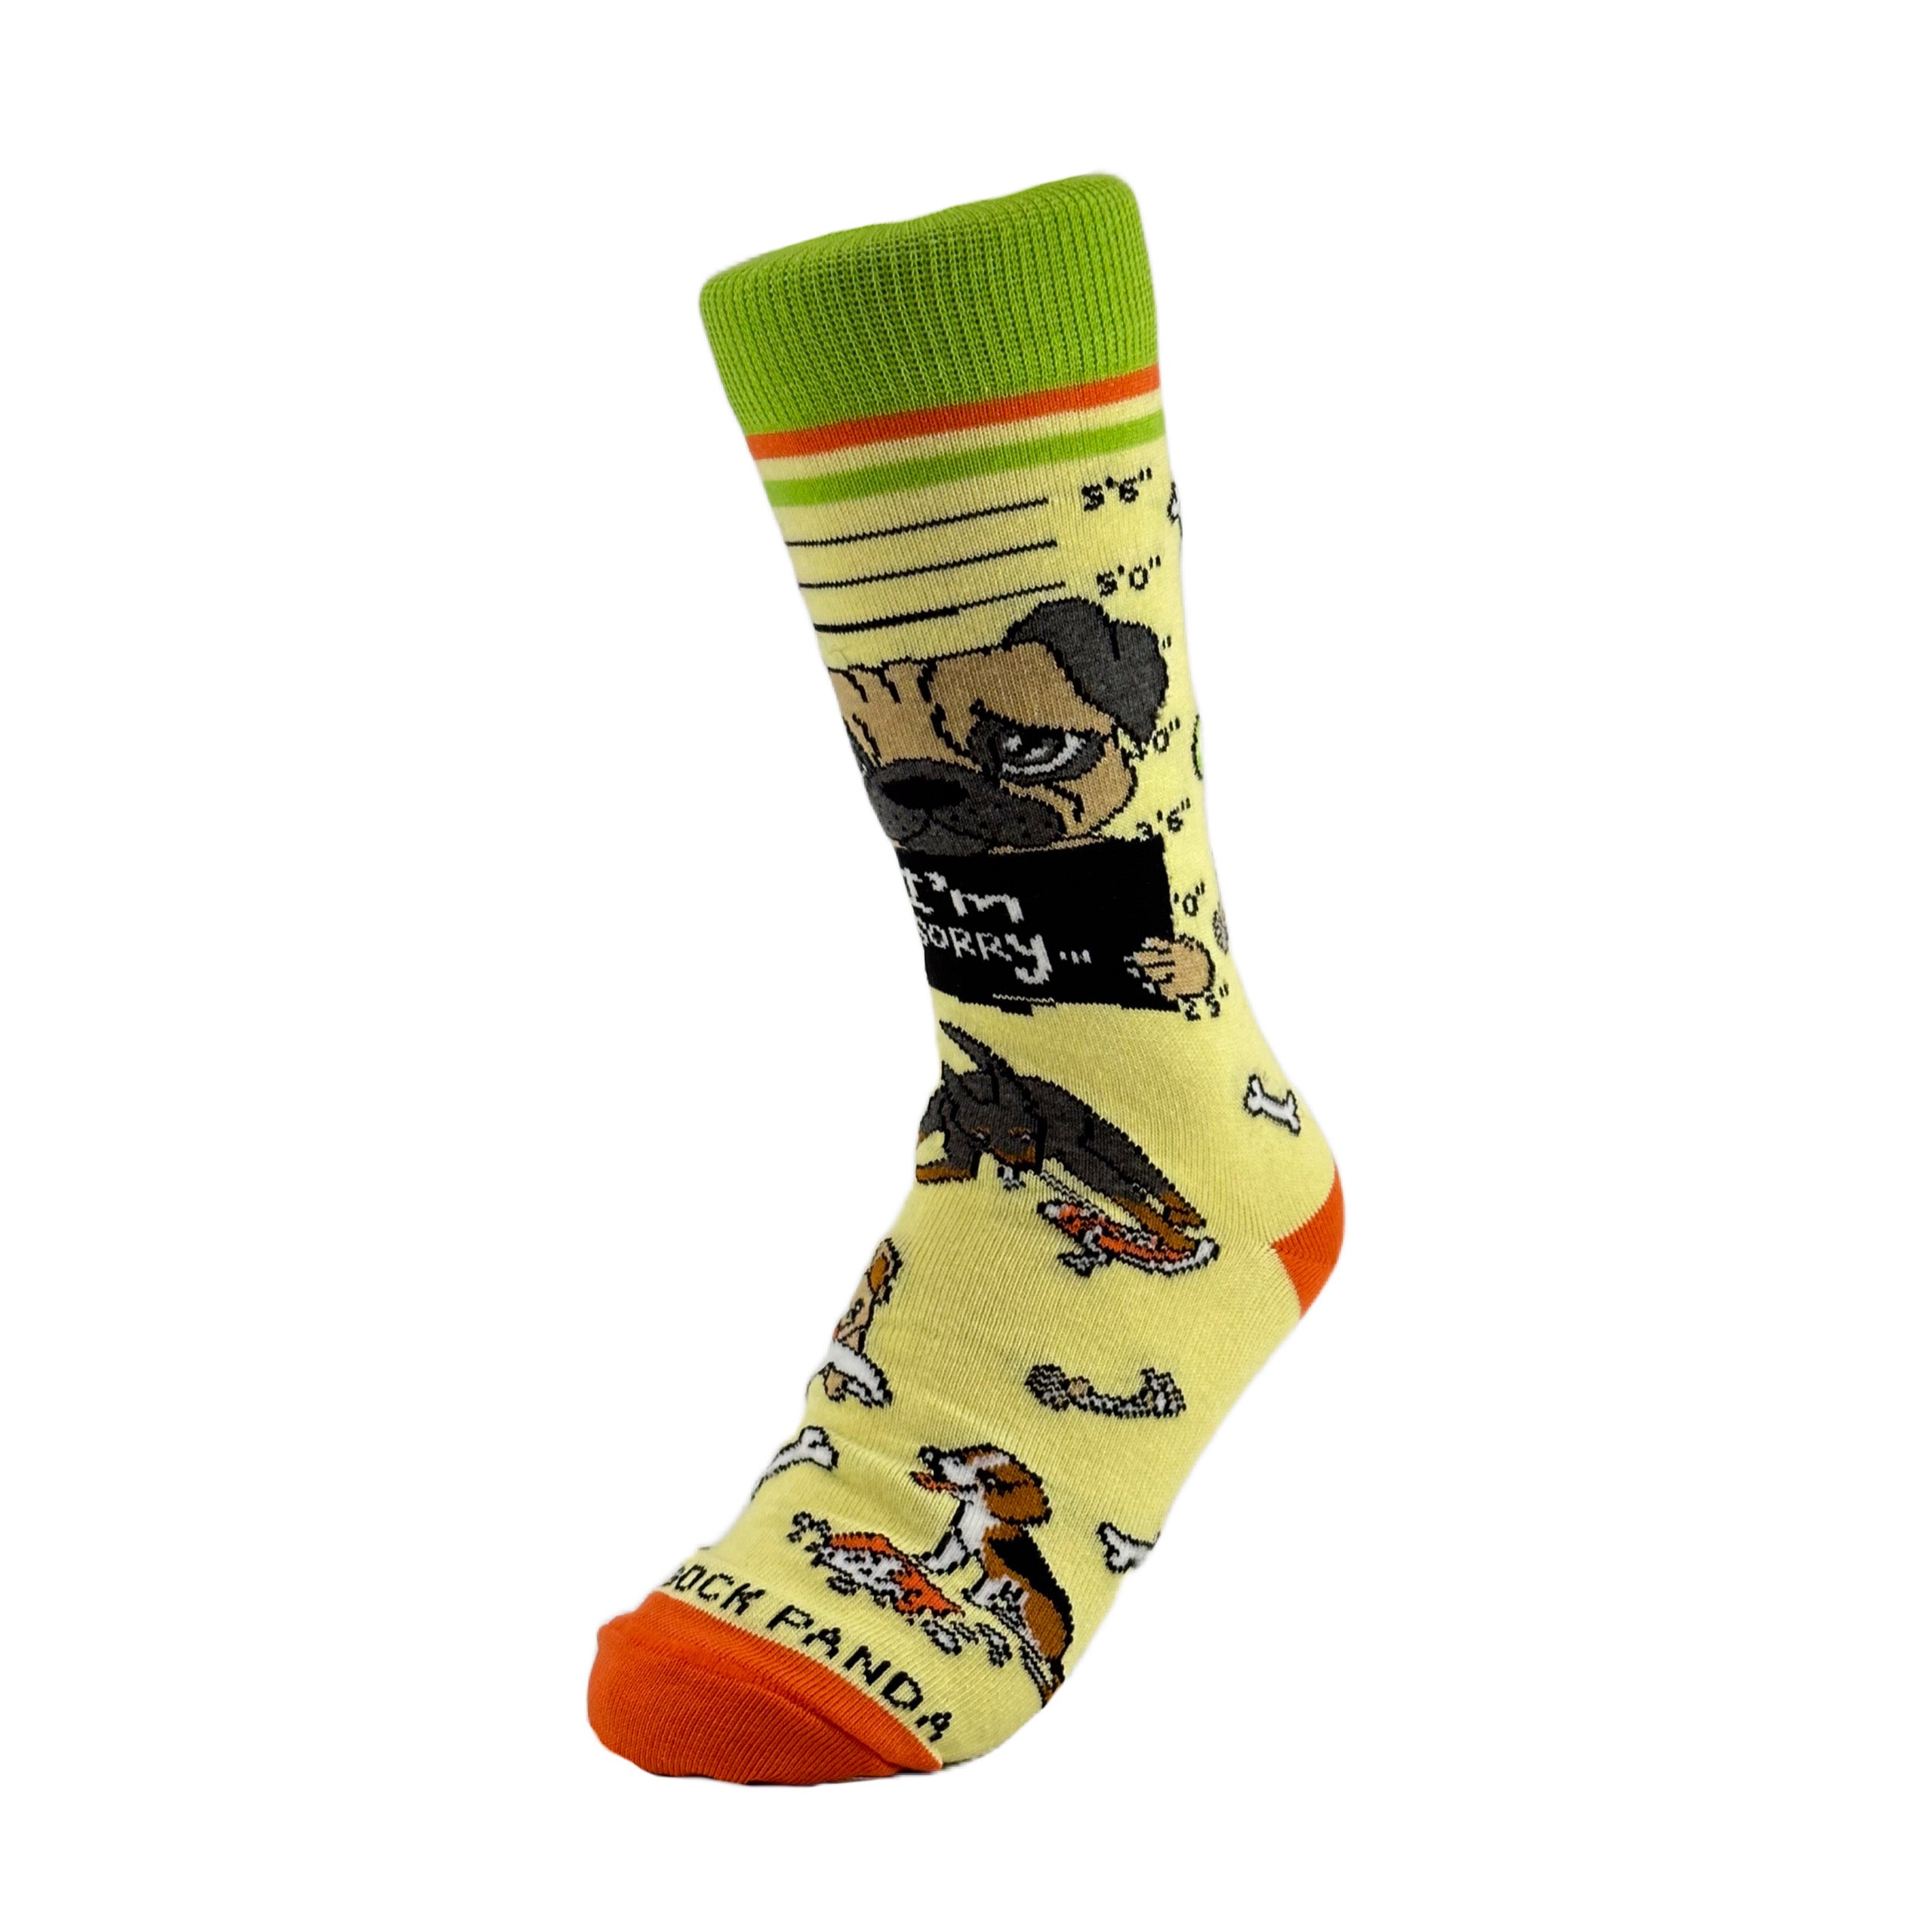 Bad and Guilty Dog Socks from the Sock Panda (Adult Small)